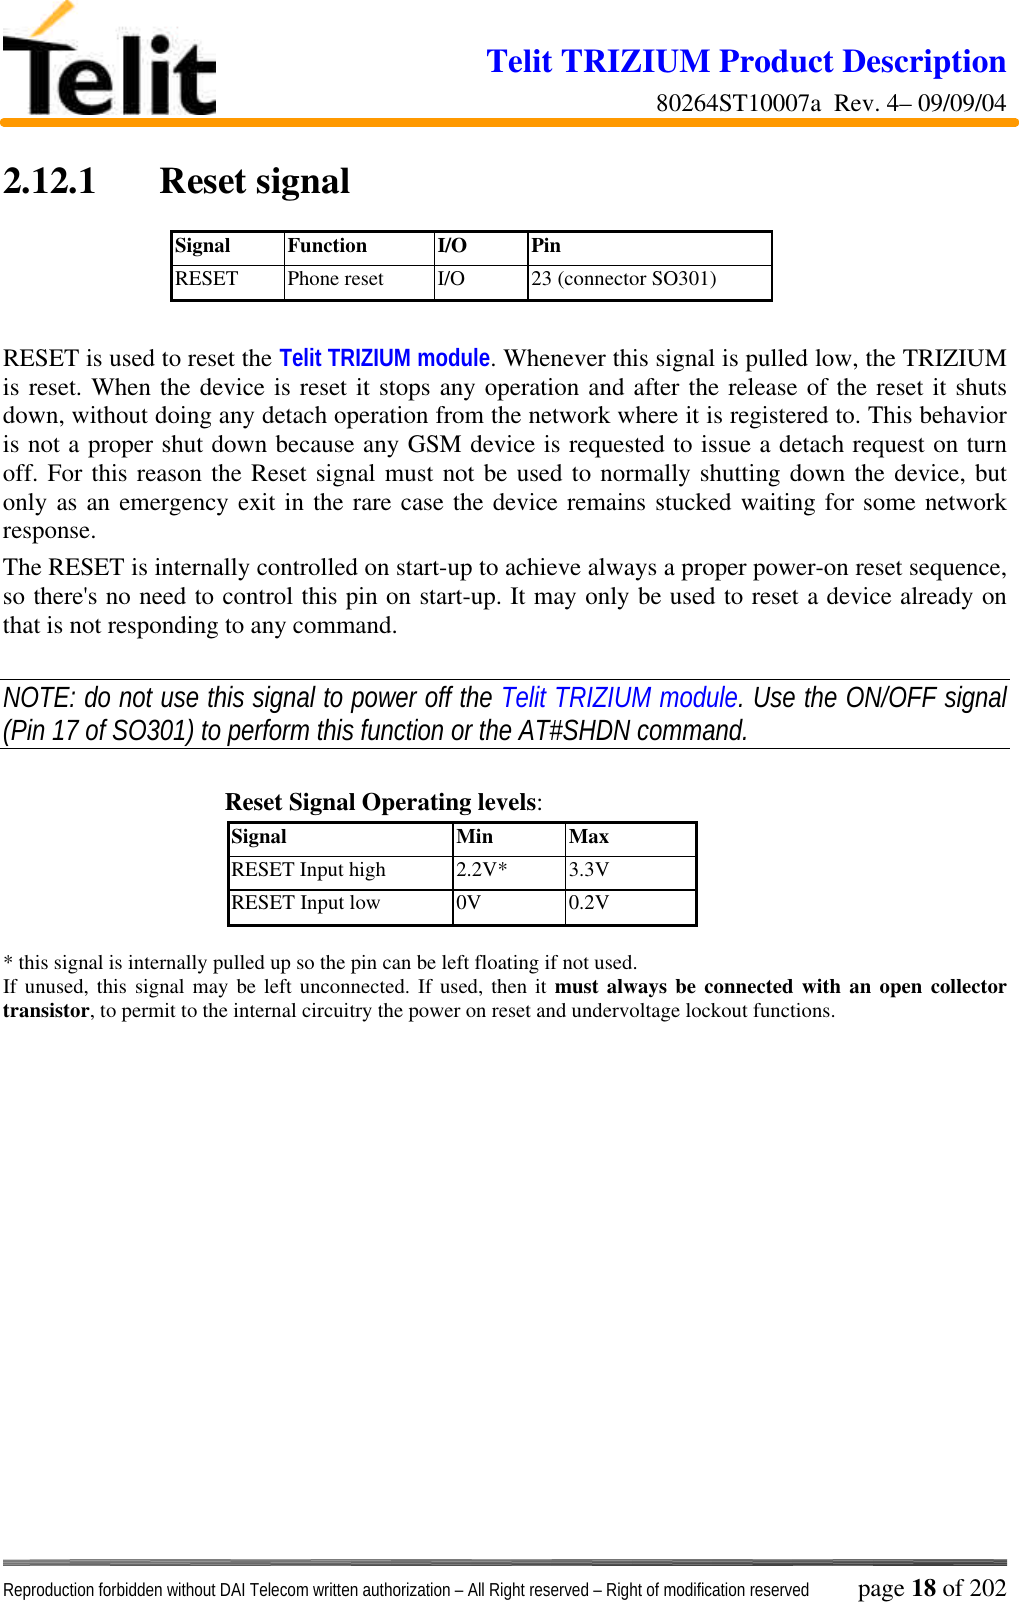 Telit TRIZIUM Product Description80264ST10007a  Rev. 4– 09/09/04Reproduction forbidden without DAI Telecom written authorization – All Right reserved – Right of modification reserved page 18 of 2022.12.1  Reset signalSignal Function I/O PinRESET Phone reset I/O 23 (connector SO301)RESET is used to reset the Telit TRIZIUM module. Whenever this signal is pulled low, the TRIZIUMis reset. When the device is reset it stops any operation and after the release of the reset it shutsdown, without doing any detach operation from the network where it is registered to. This behavioris not a proper shut down because any GSM device is requested to issue a detach request on turnoff. For this reason the Reset signal must not be used to normally shutting down the device, butonly as an emergency exit in the rare case the device remains stucked waiting for some networkresponse.The RESET is internally controlled on start-up to achieve always a proper power-on reset sequence,so there&apos;s no need to control this pin on start-up. It may only be used to reset a device already onthat is not responding to any command.NOTE: do not use this signal to power off the Telit TRIZIUM module. Use the ON/OFF signal(Pin 17 of SO301) to perform this function or the AT#SHDN command.Reset Signal Operating levels:Signal Min MaxRESET Input high 2.2V* 3.3VRESET Input low 0V 0.2V* this signal is internally pulled up so the pin can be left floating if not used.If unused, this signal may be left unconnected. If used, then it must always be connected with an open collectortransistor, to permit to the internal circuitry the power on reset and undervoltage lockout functions.